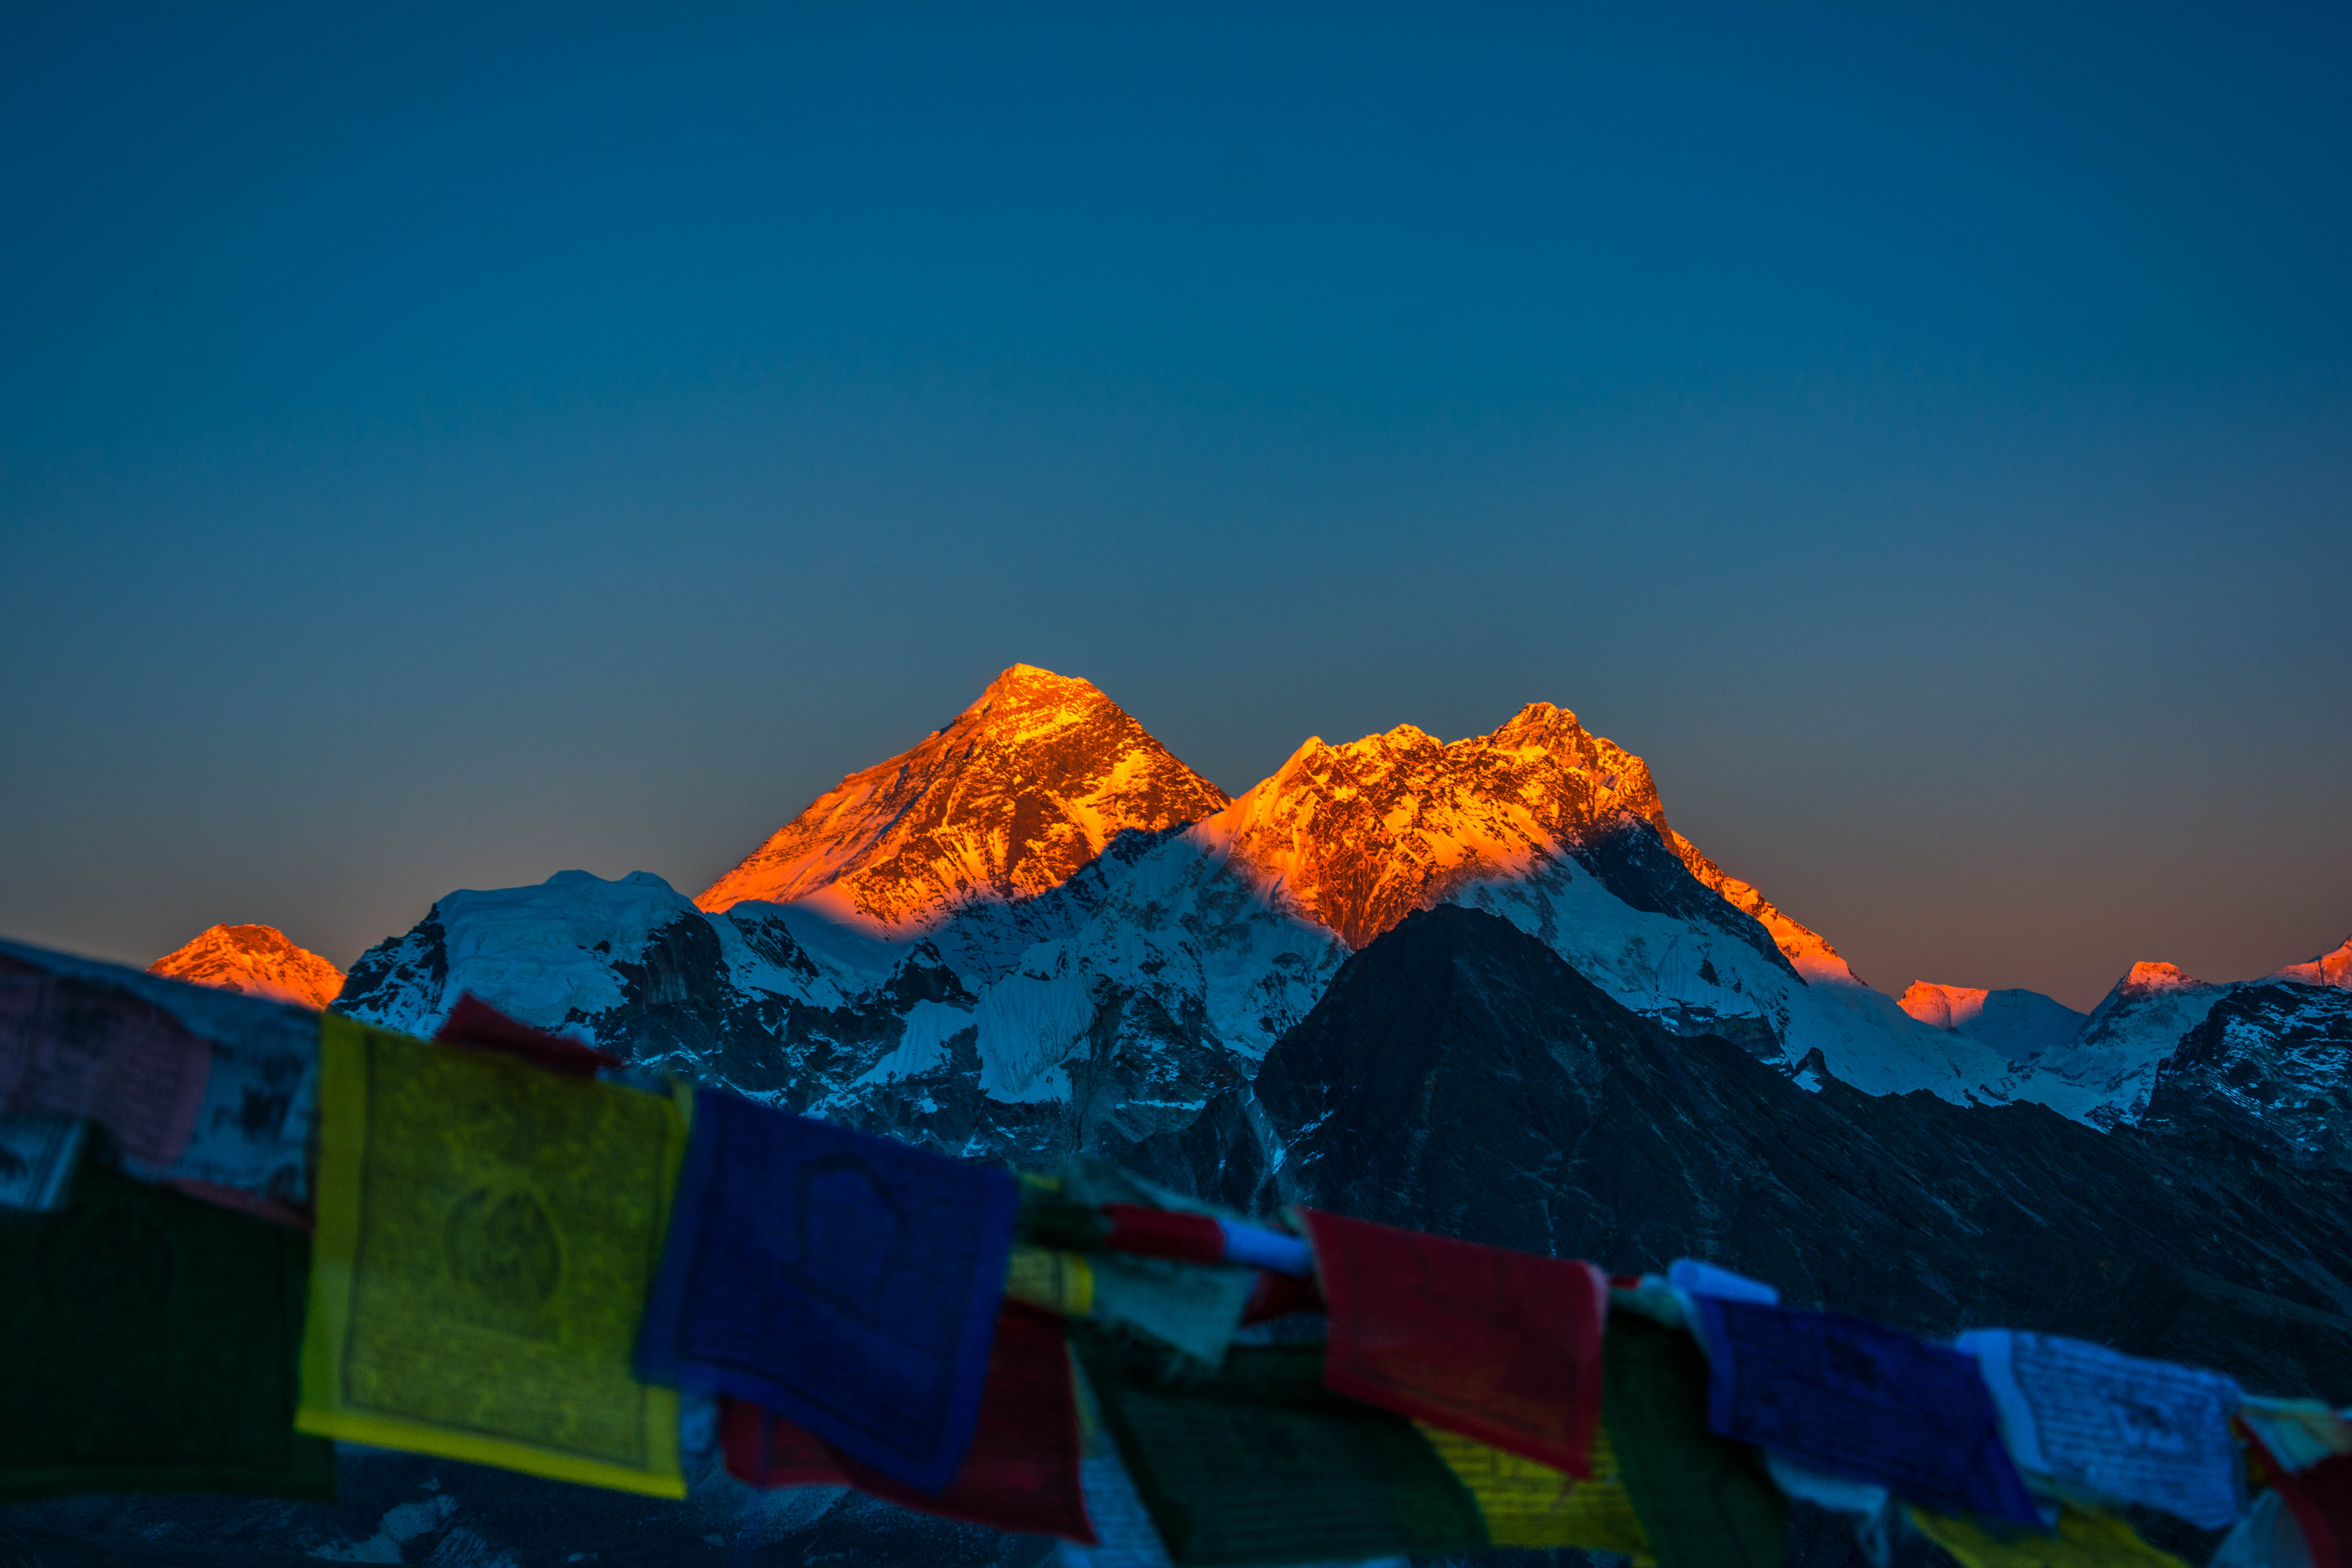 Are you traveling Nepal? Here are 6 reasons why trekking in Nepal is an